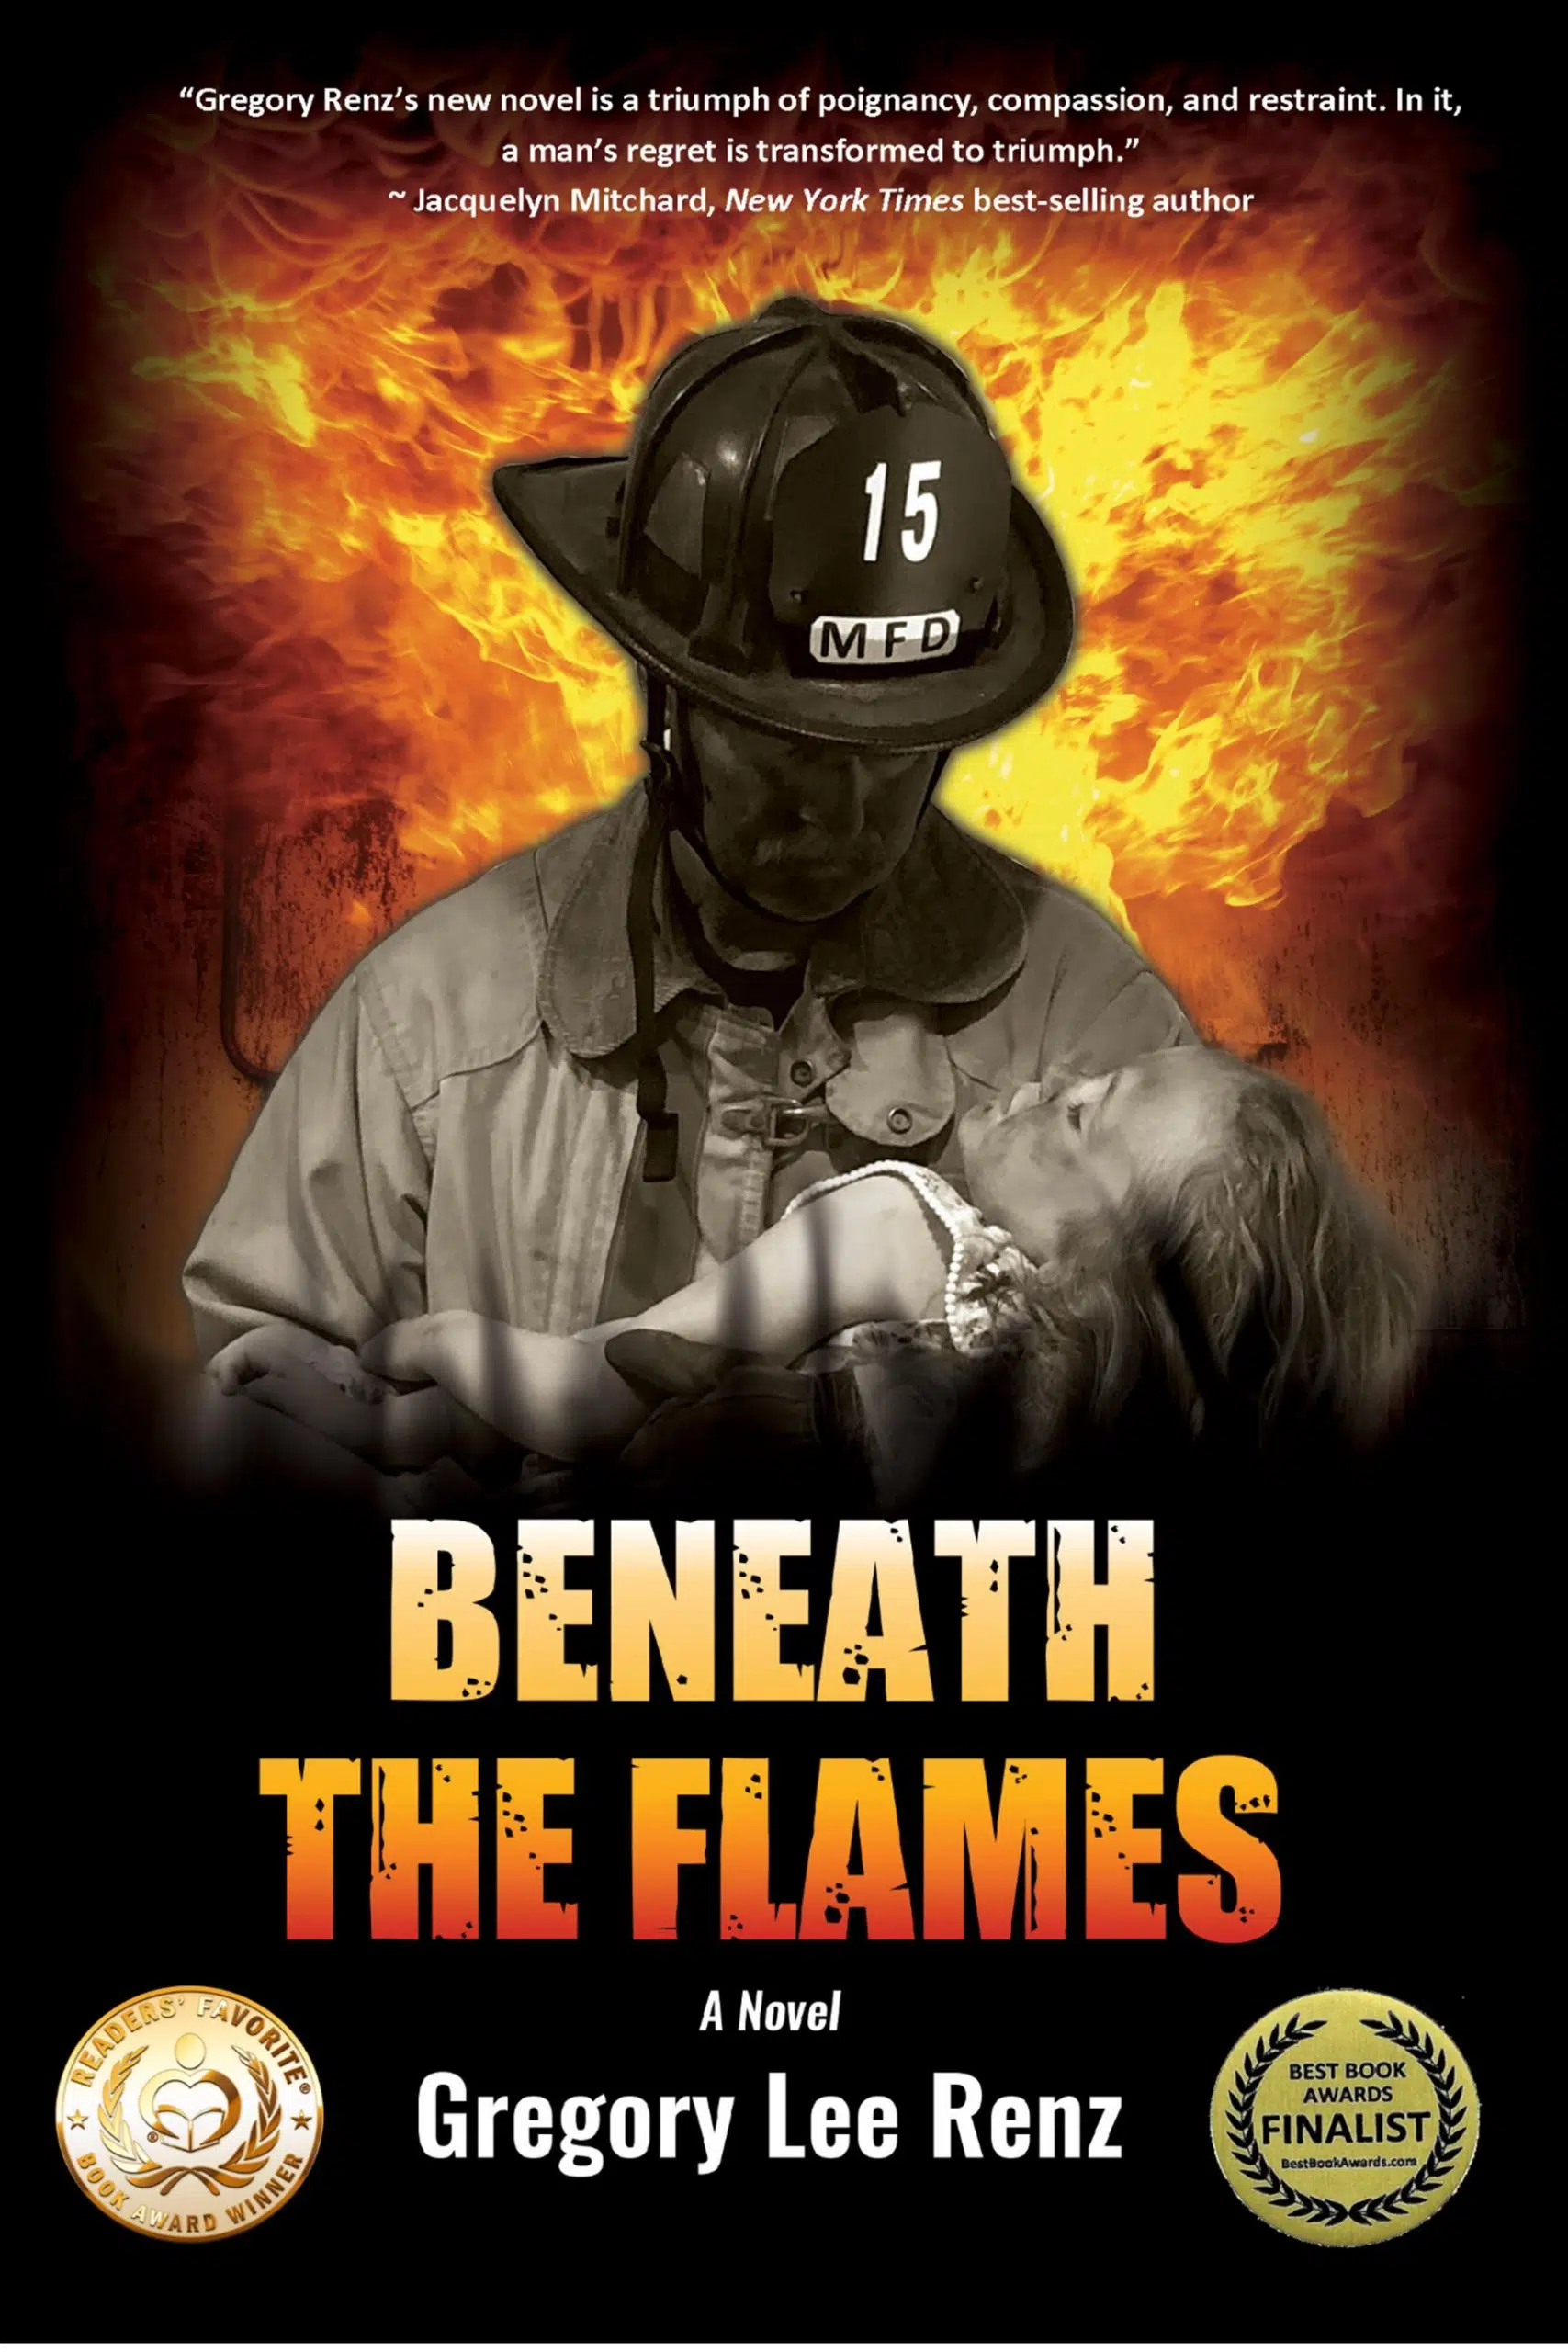 Manitowoc Public Library Hosting the Author of "Beneath the Flames"